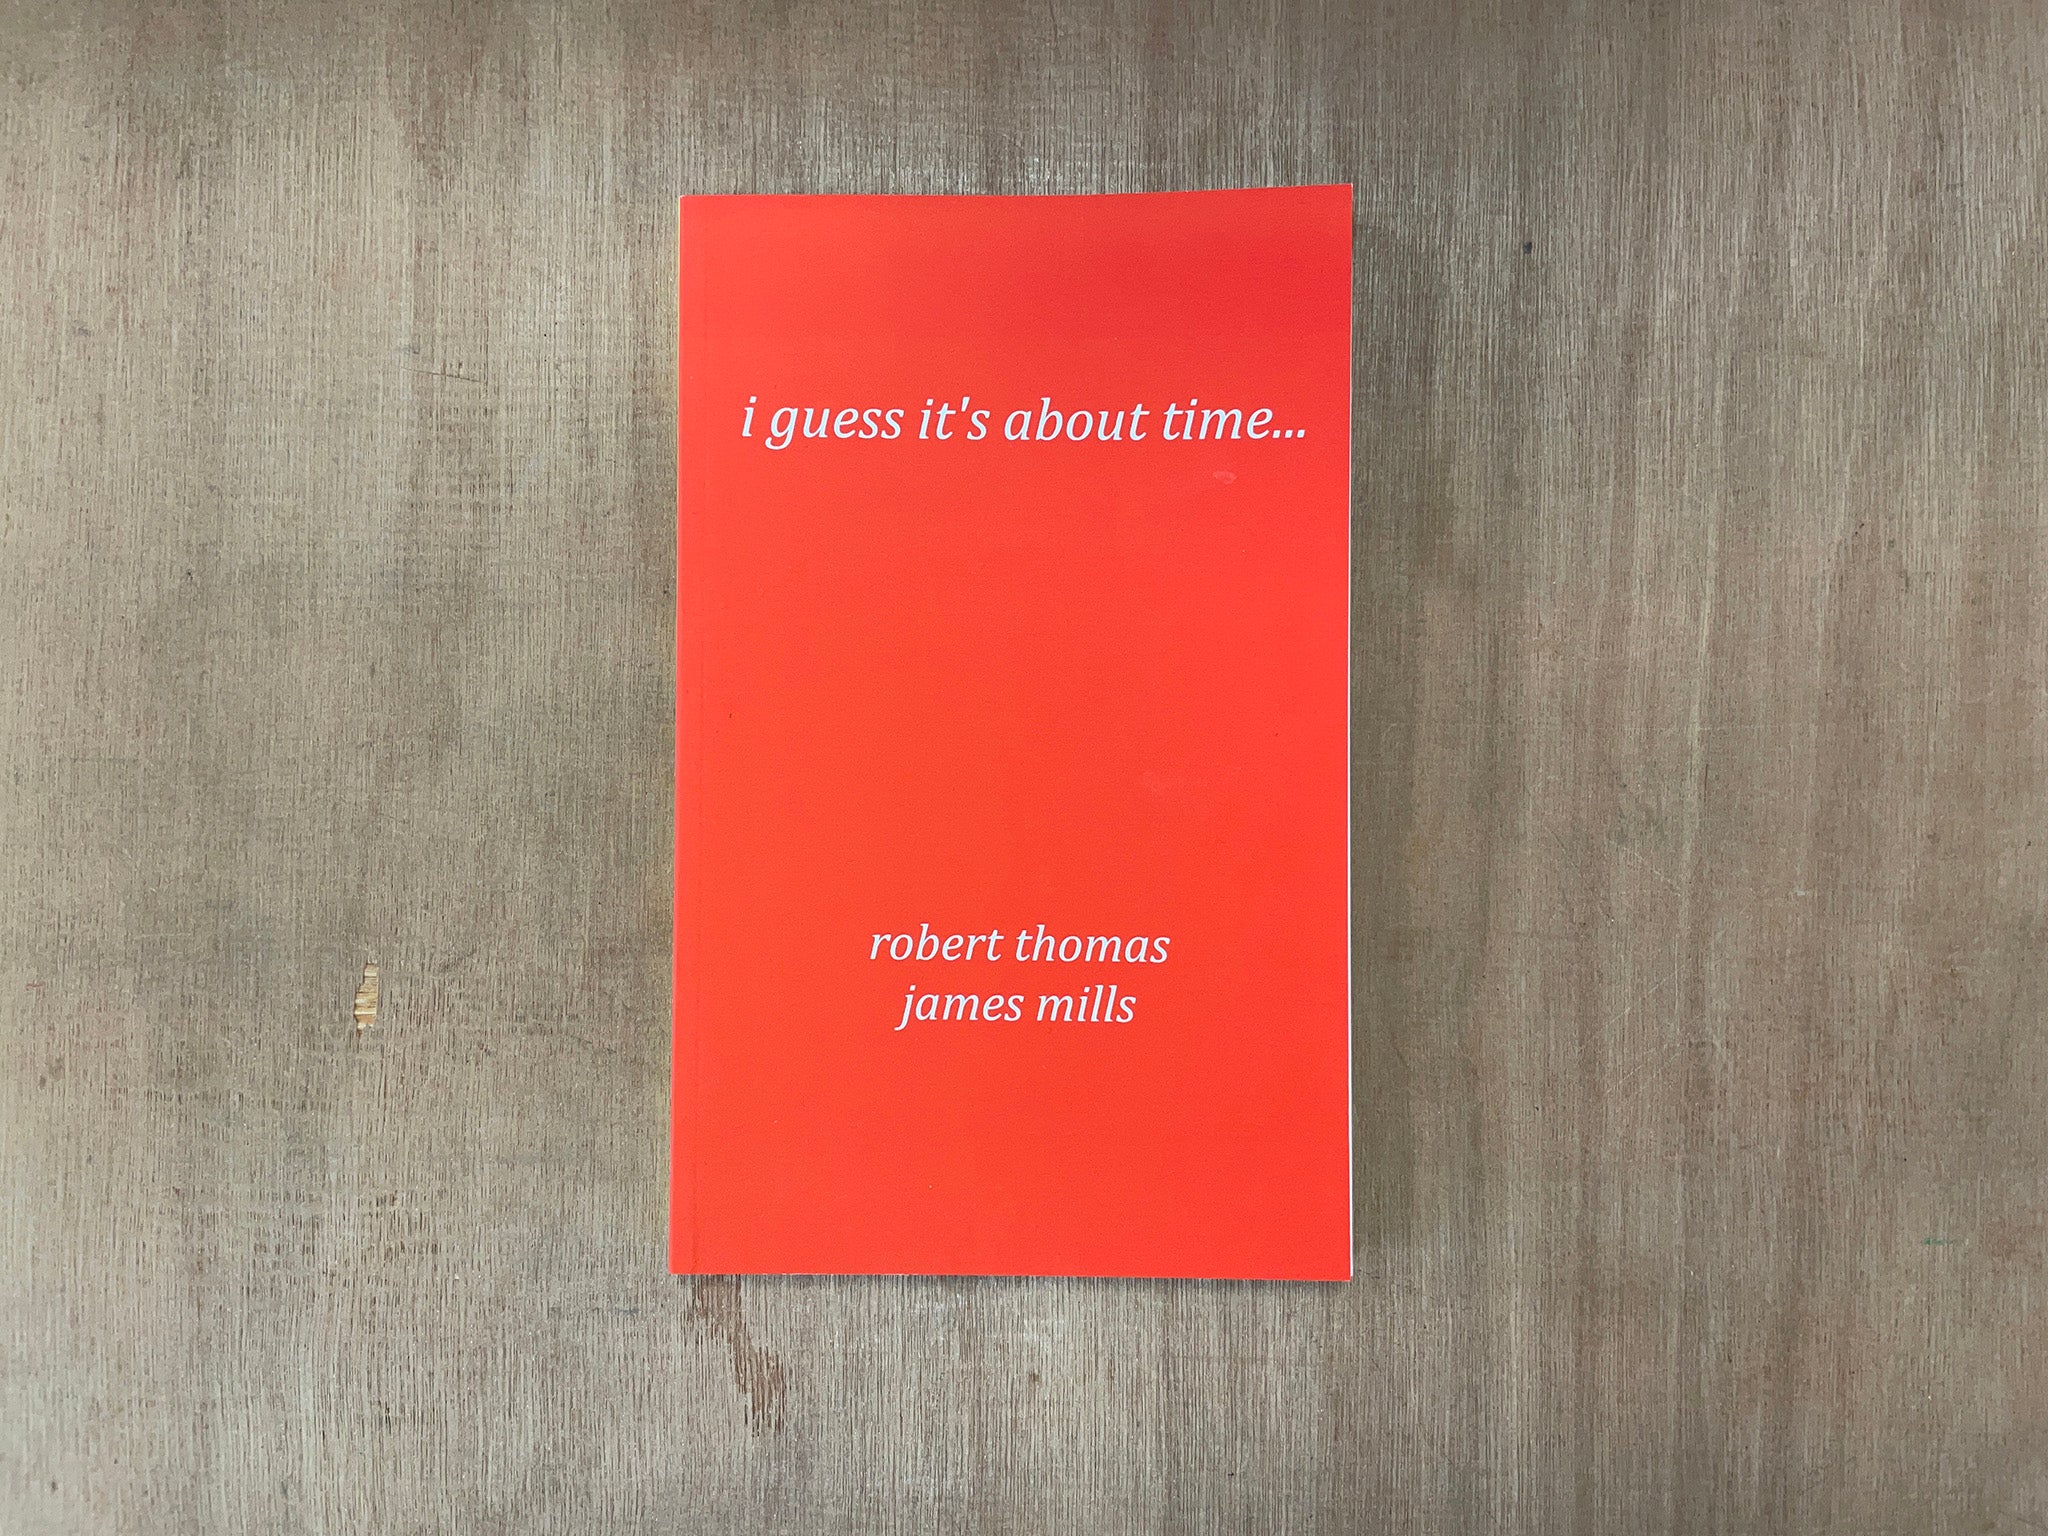 I GUESS IT'S ABOUT TIME... by Robert Thomas James Mills